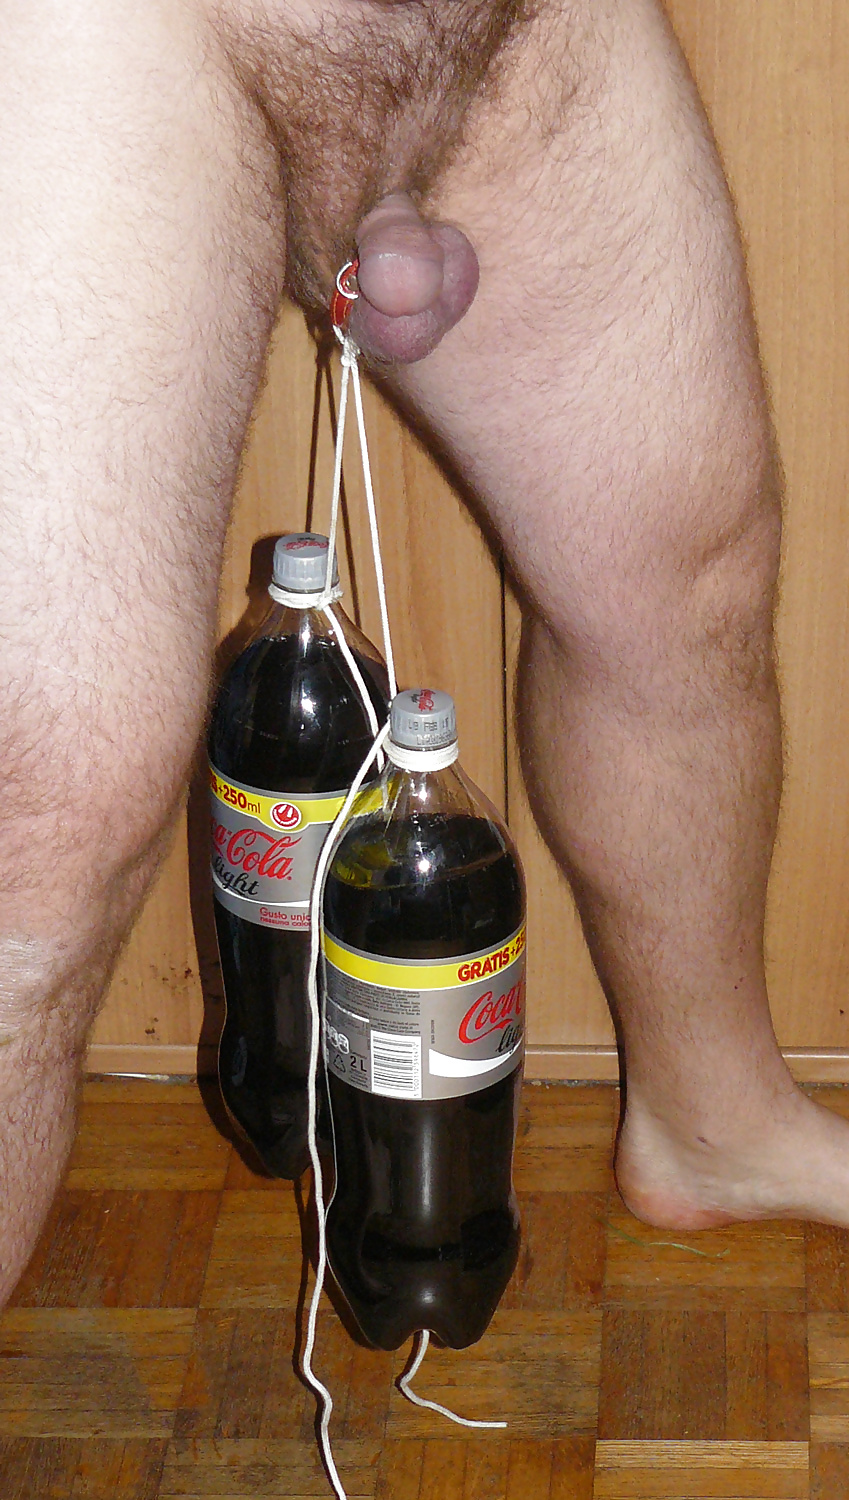 Sex Gallery cbt with coca cola bottle